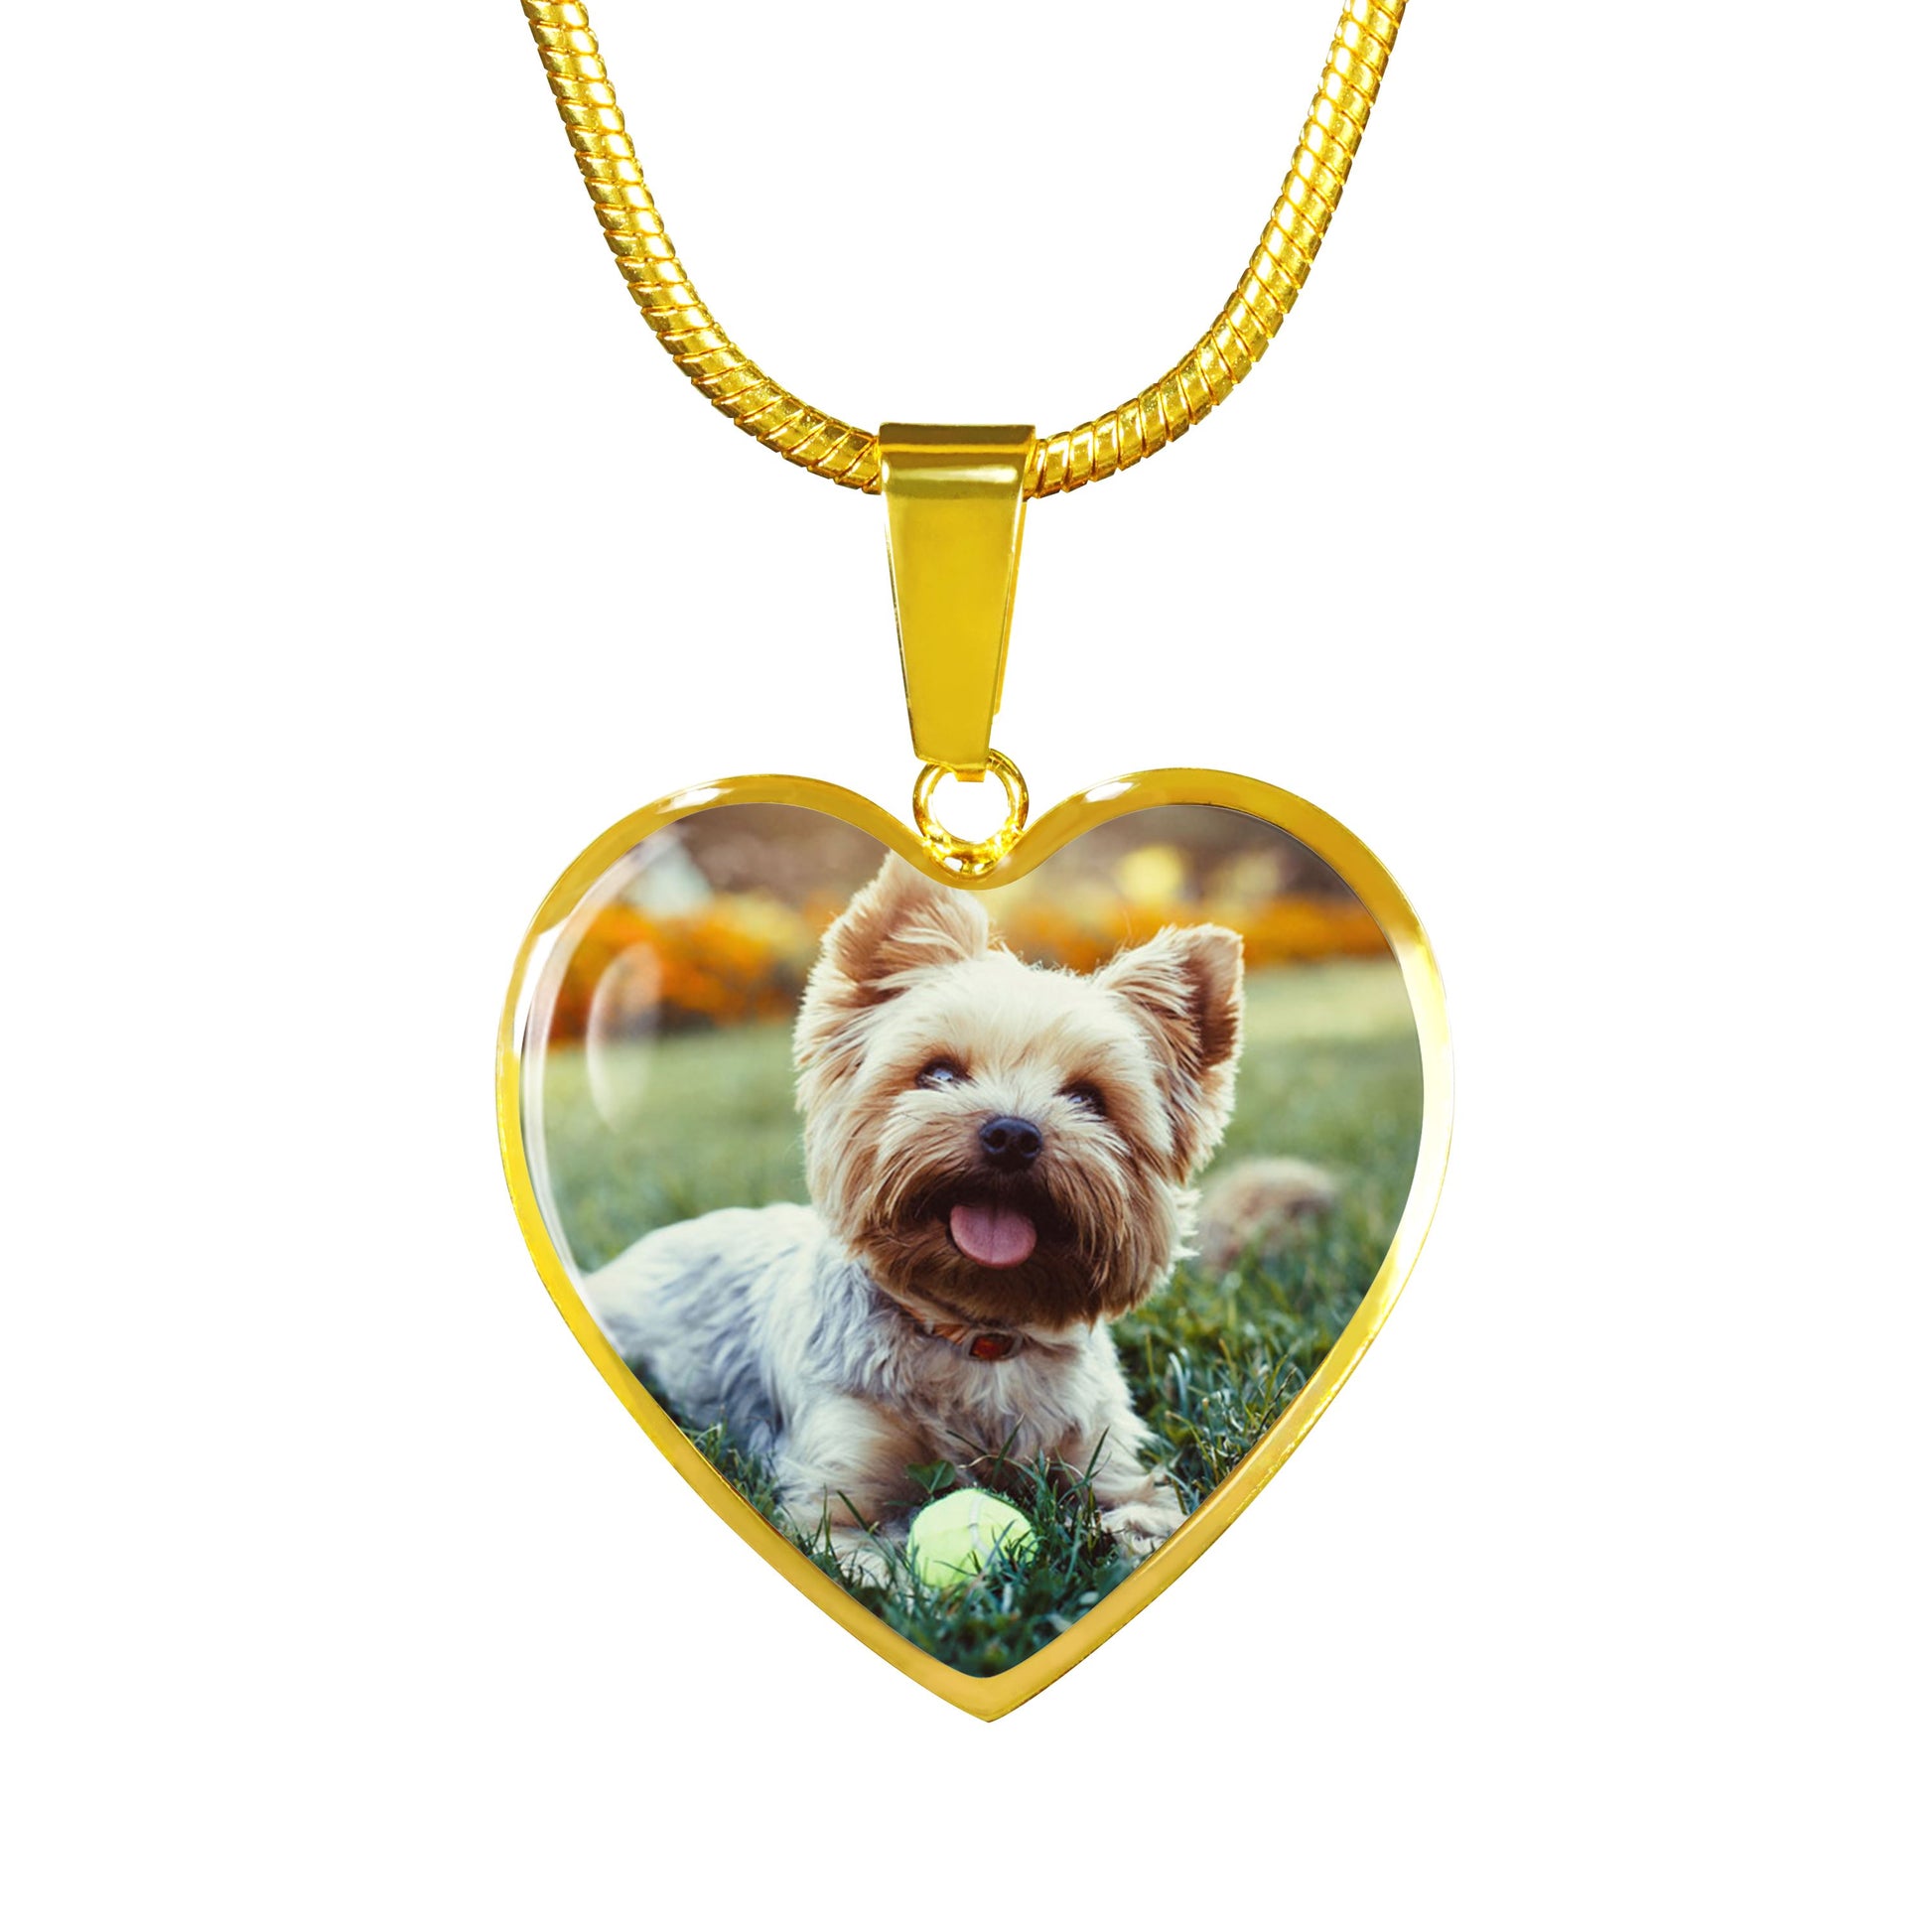 Share The Love For Your Furry Friend With Our Customizable Dog Lover Necklace Jewelry Luxury Necklace (Gold) No 